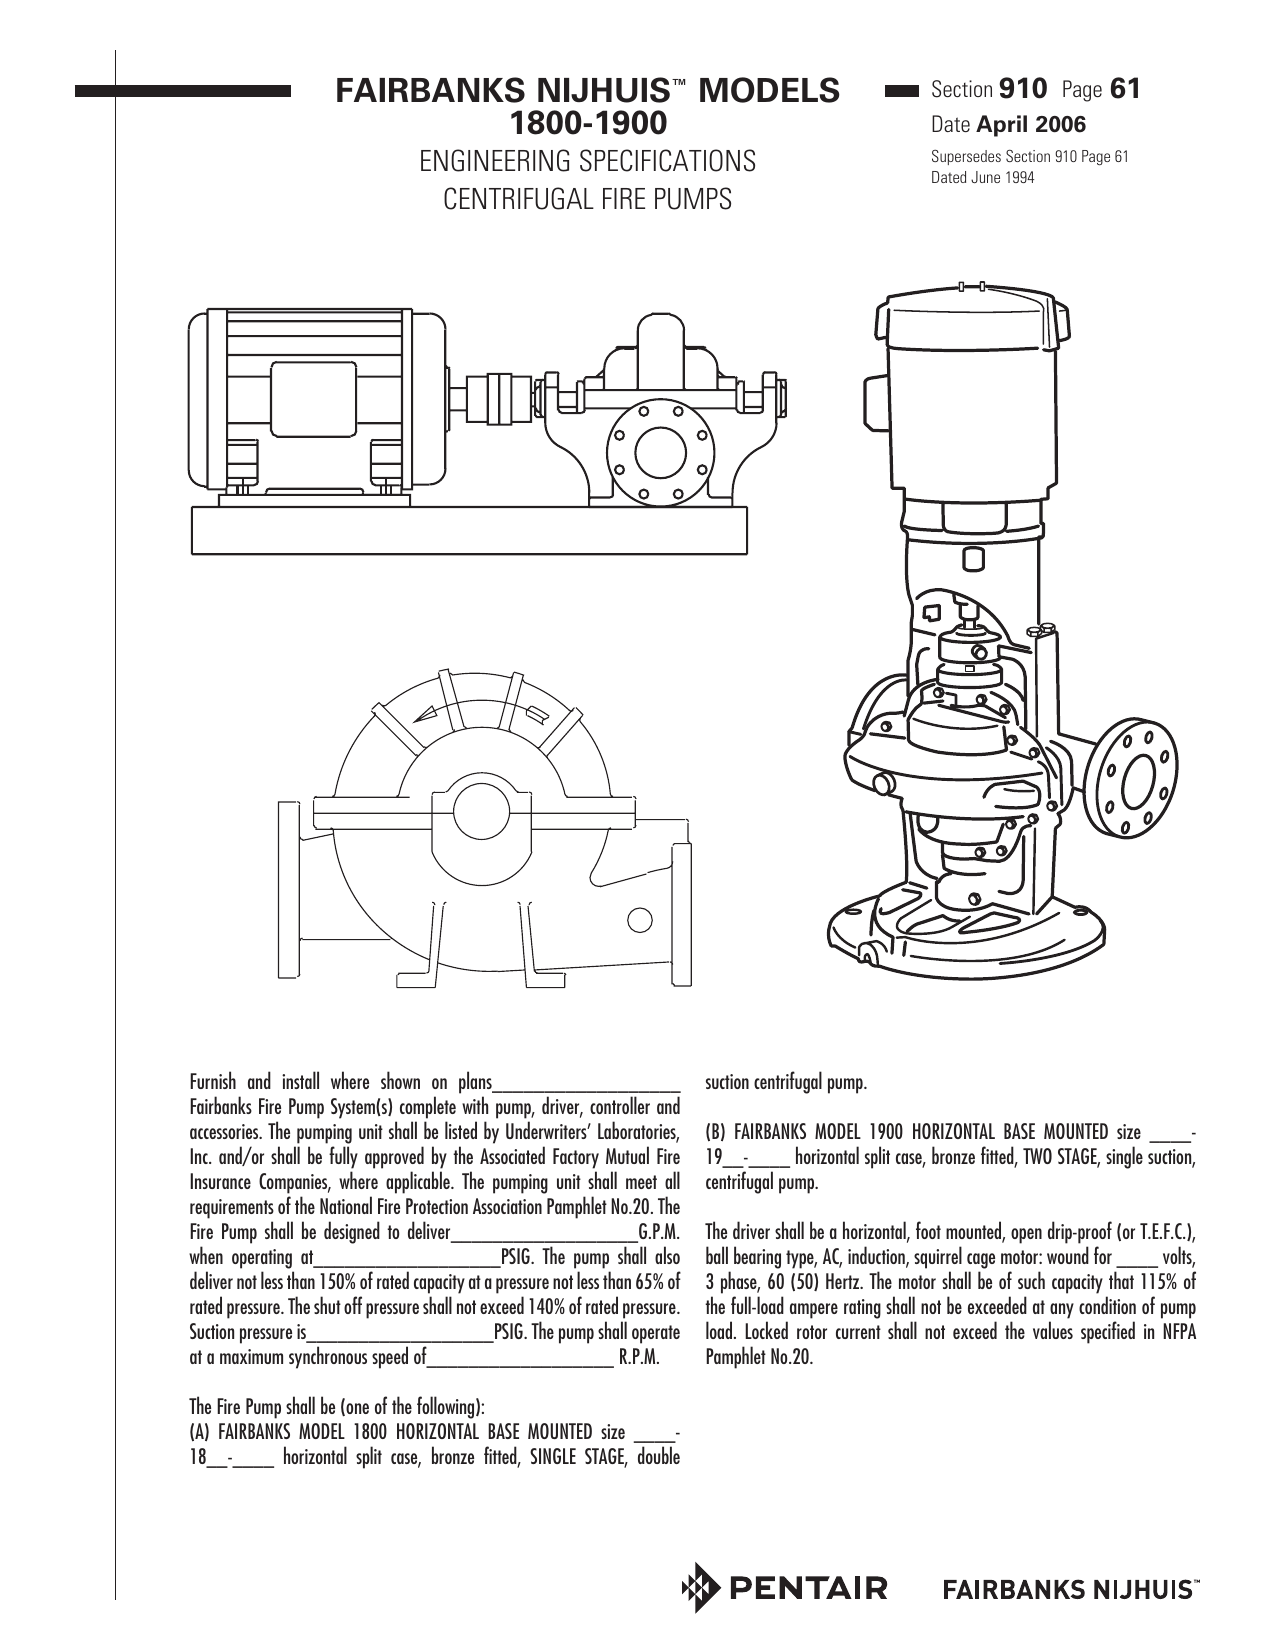 Fairbanks-nijhuis Specifications - 1800-1900 Centrifugal Fire Pumps  Specifications | Manualzz  Pentair 910 Controller Wiring Diagram    Manualzz